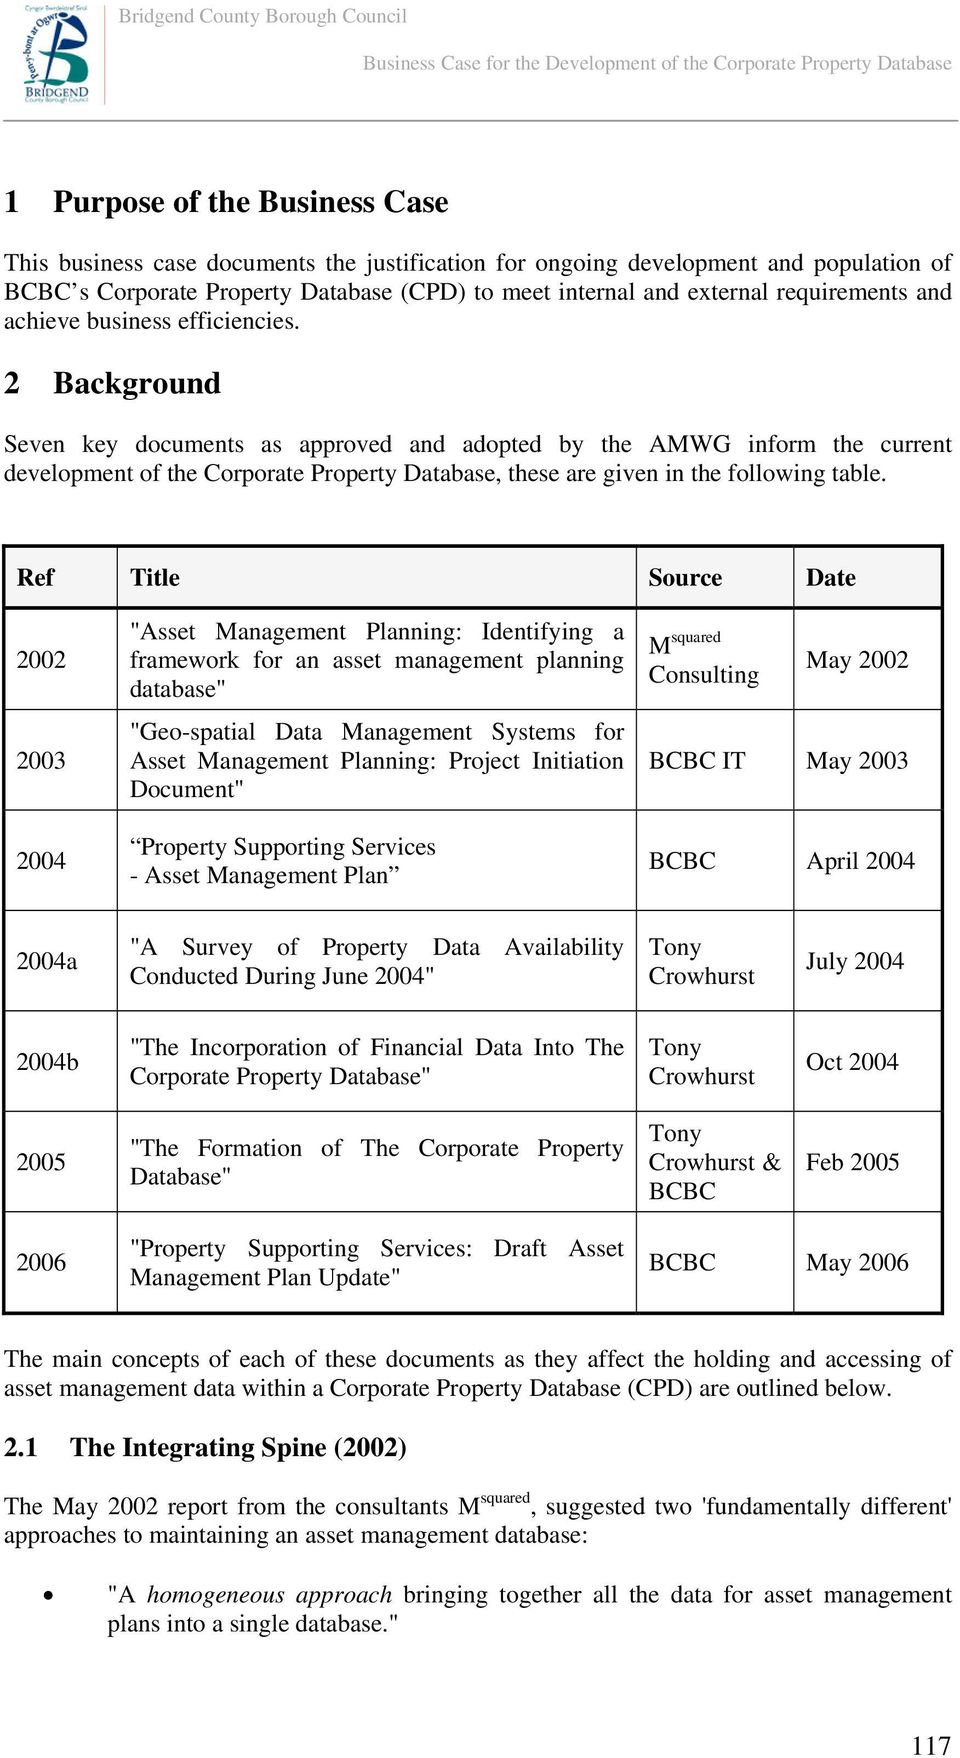 2 Background Seven key documents as approved and adopted by the AMWG inform the current development of the Corporate Property Database, these are given in the following table.